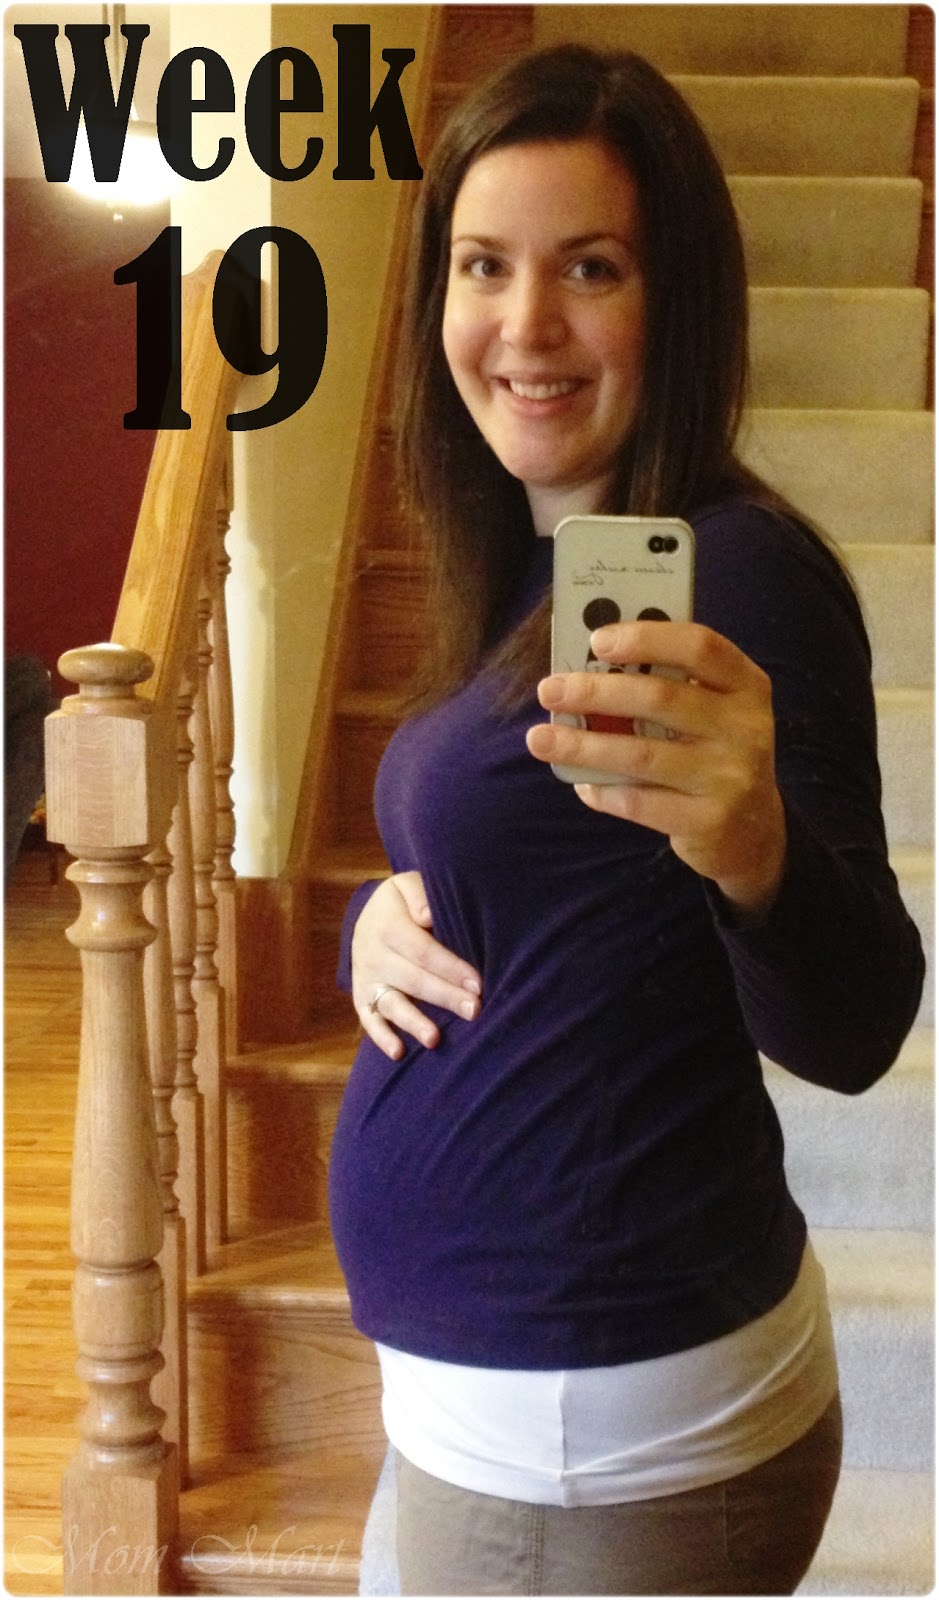 Baby Development Pregnancy 19 Weeks: What to Expect